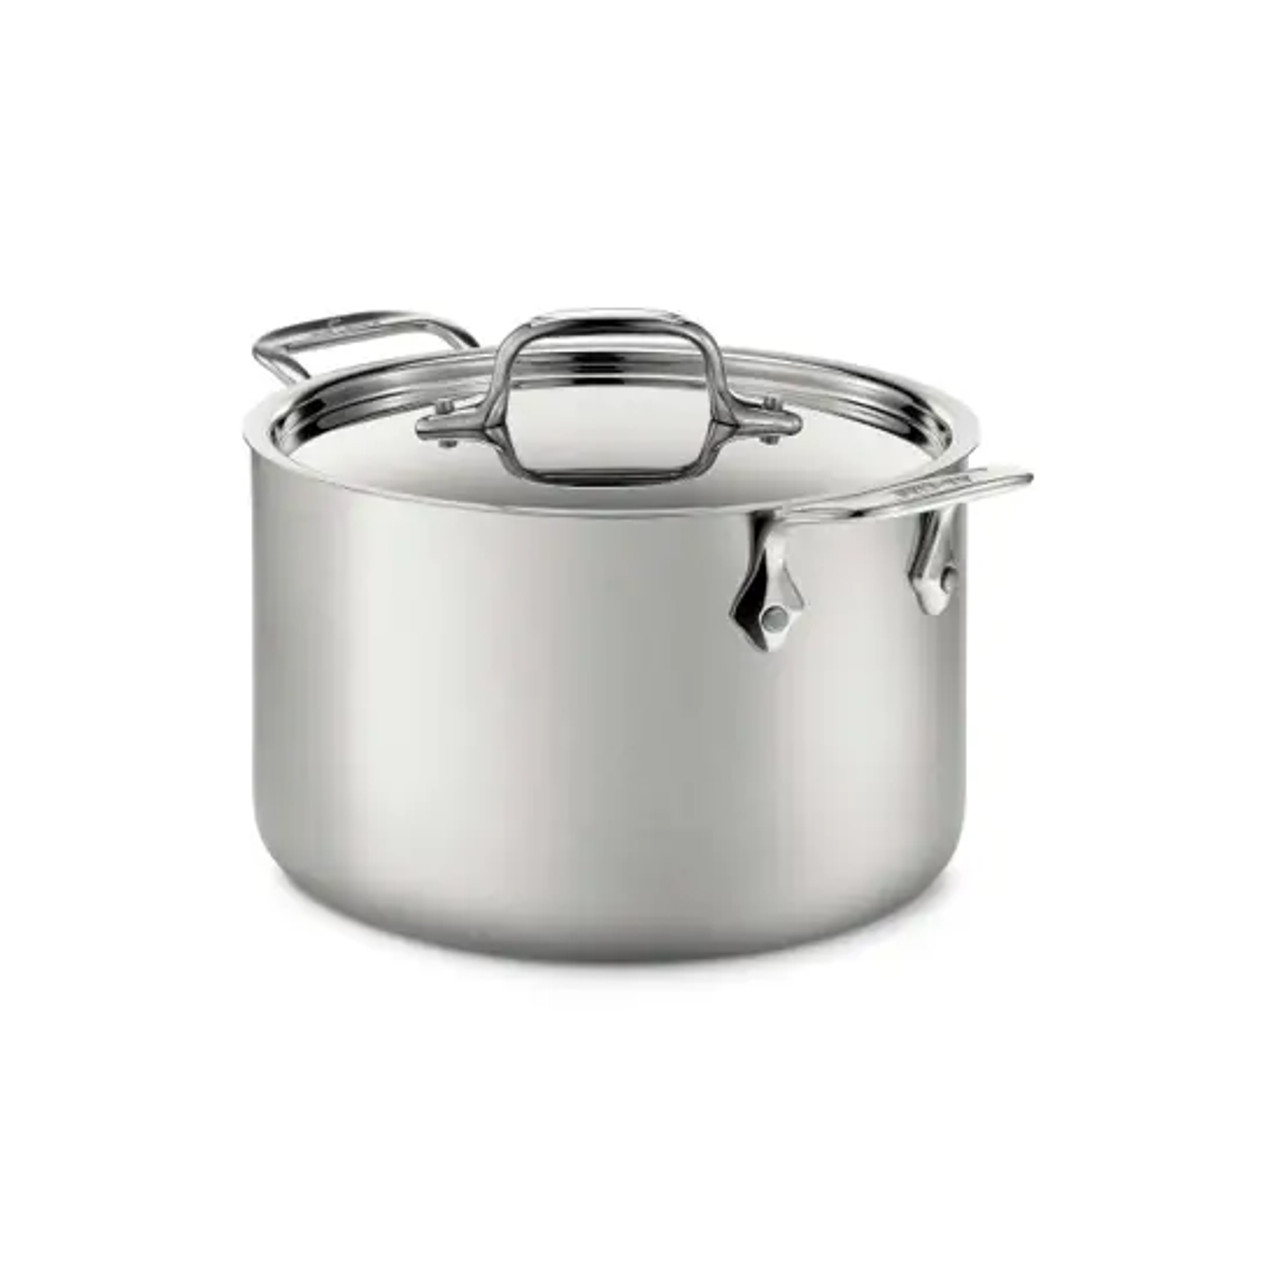  All-Clad D5 5-Ply Brushed Stainless Steel Fry Pan 8